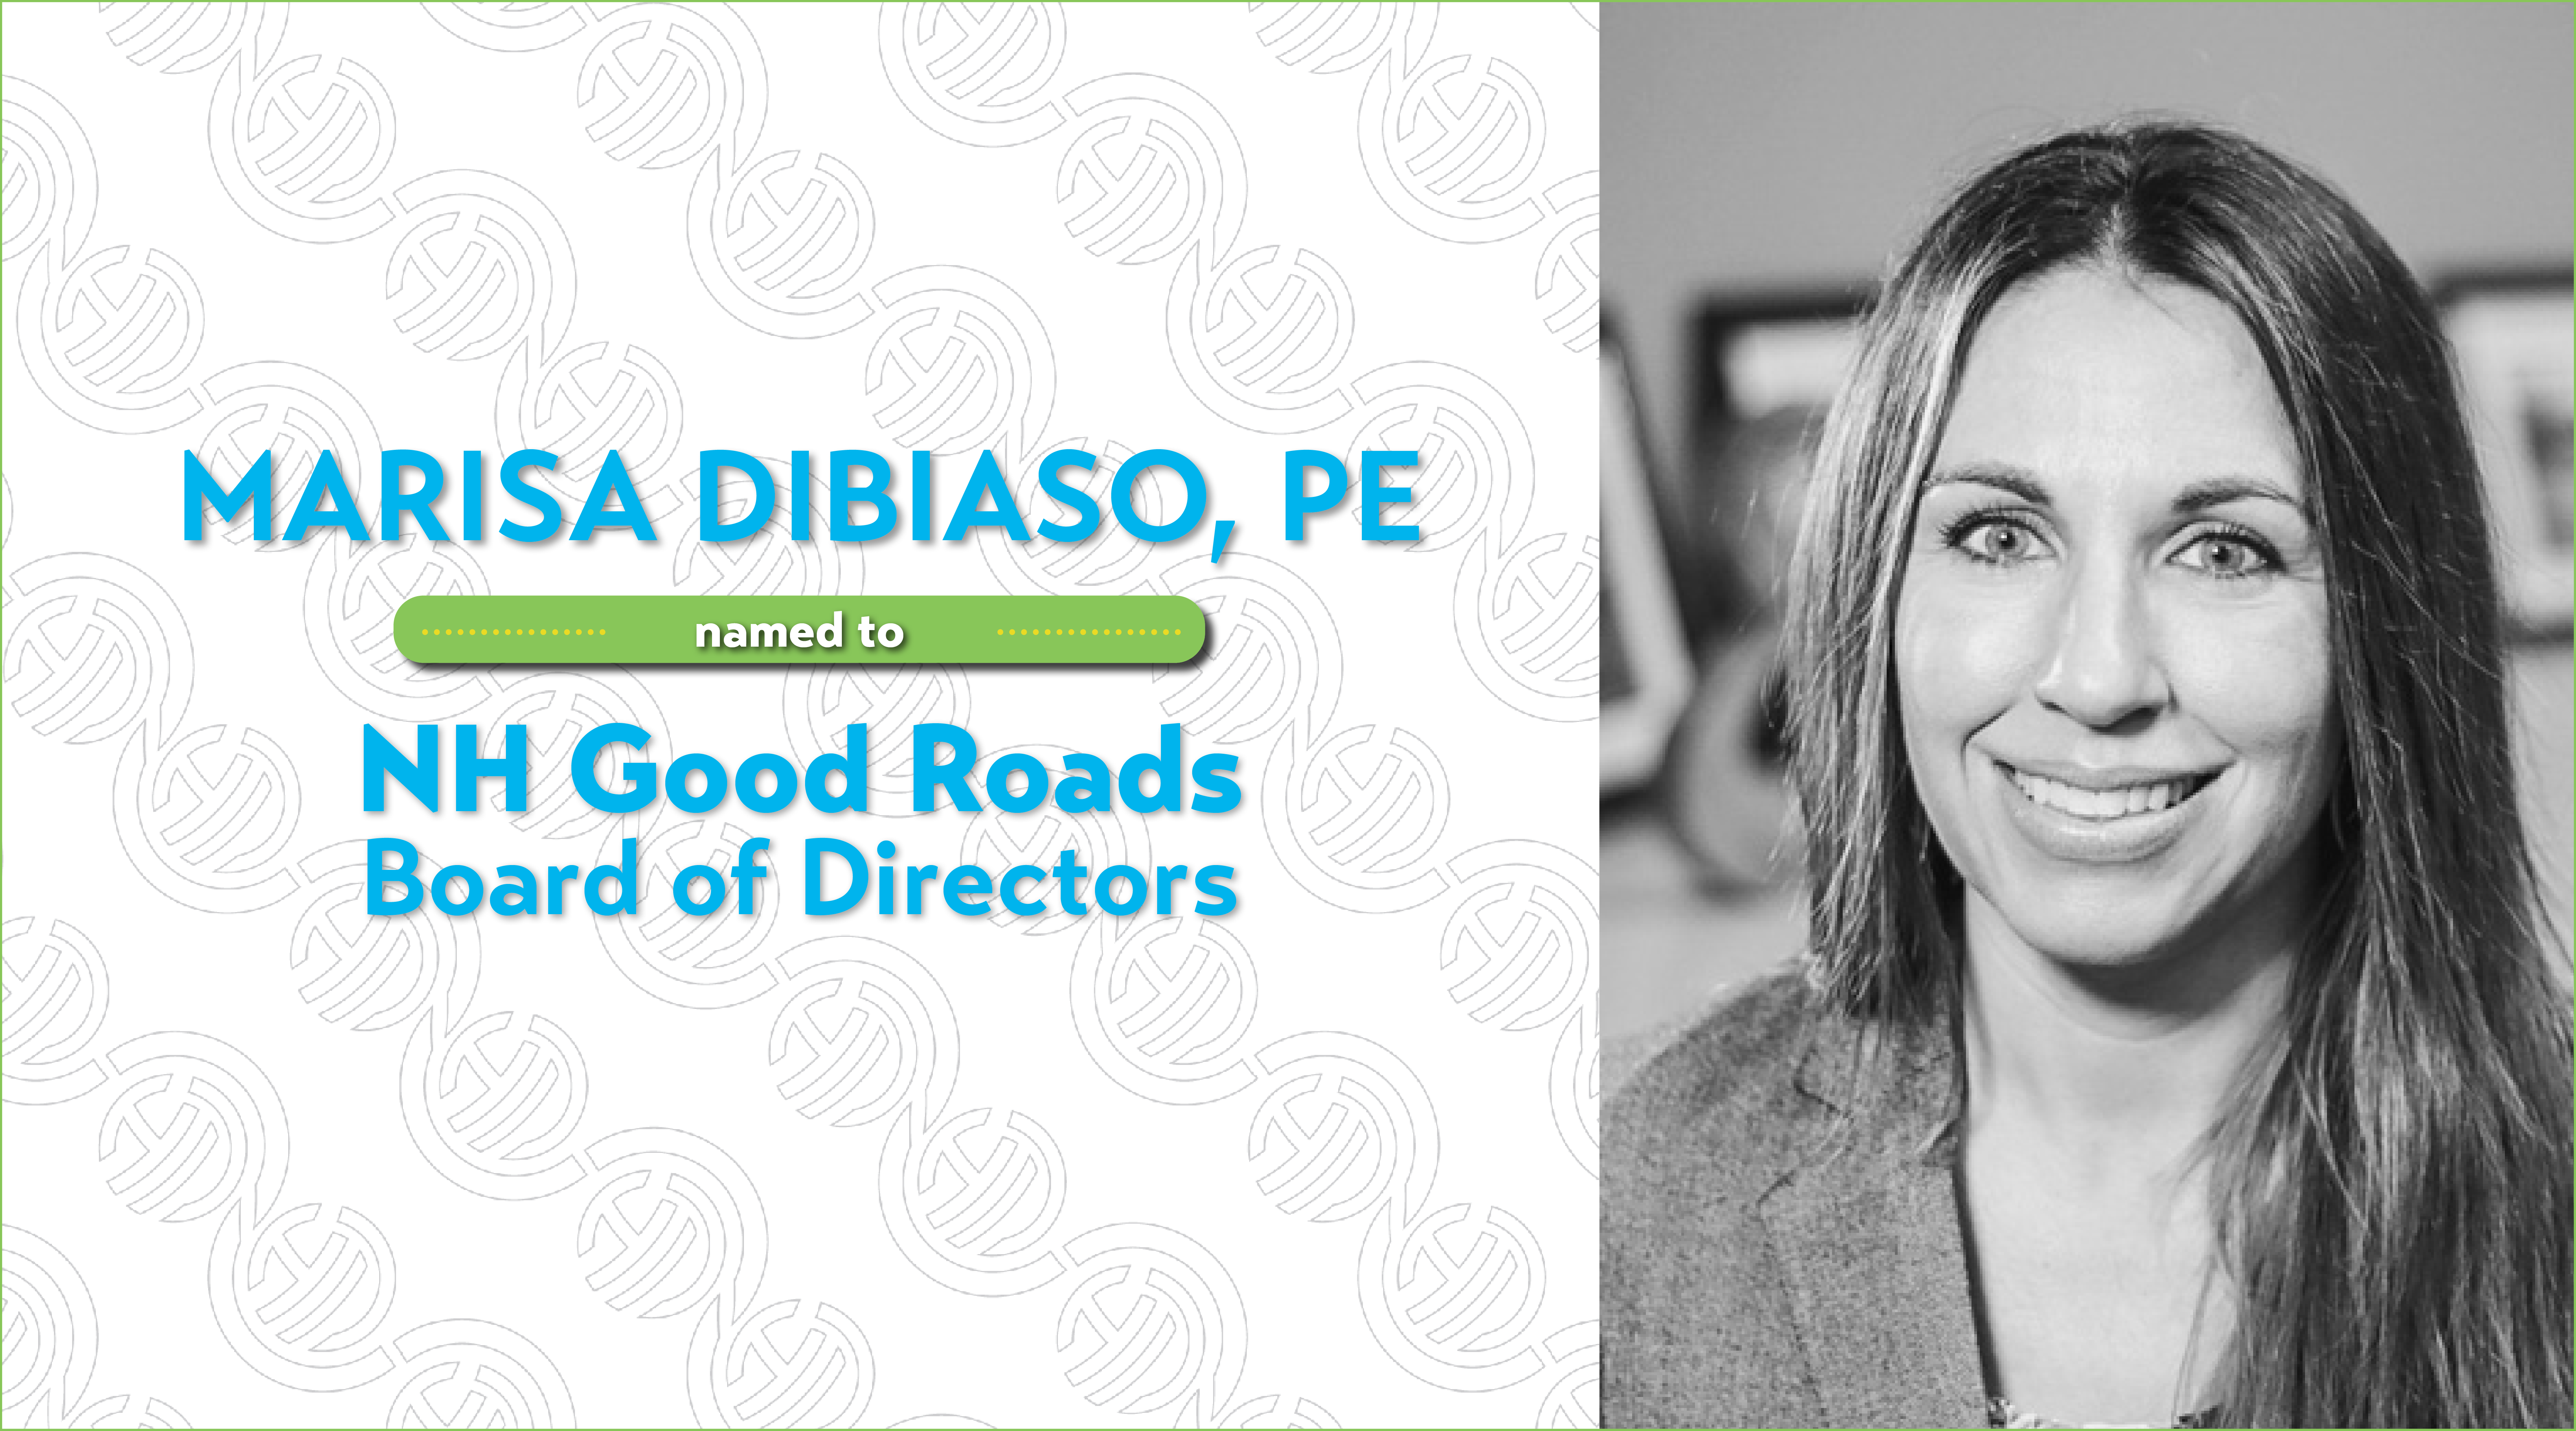 Marisa DiBiaso named to Board of Directors for NH Good Roads. Featured image showcases her corporate headshot in black and white on the right and the name of the article on the left in Hoyle Tanner branded colors